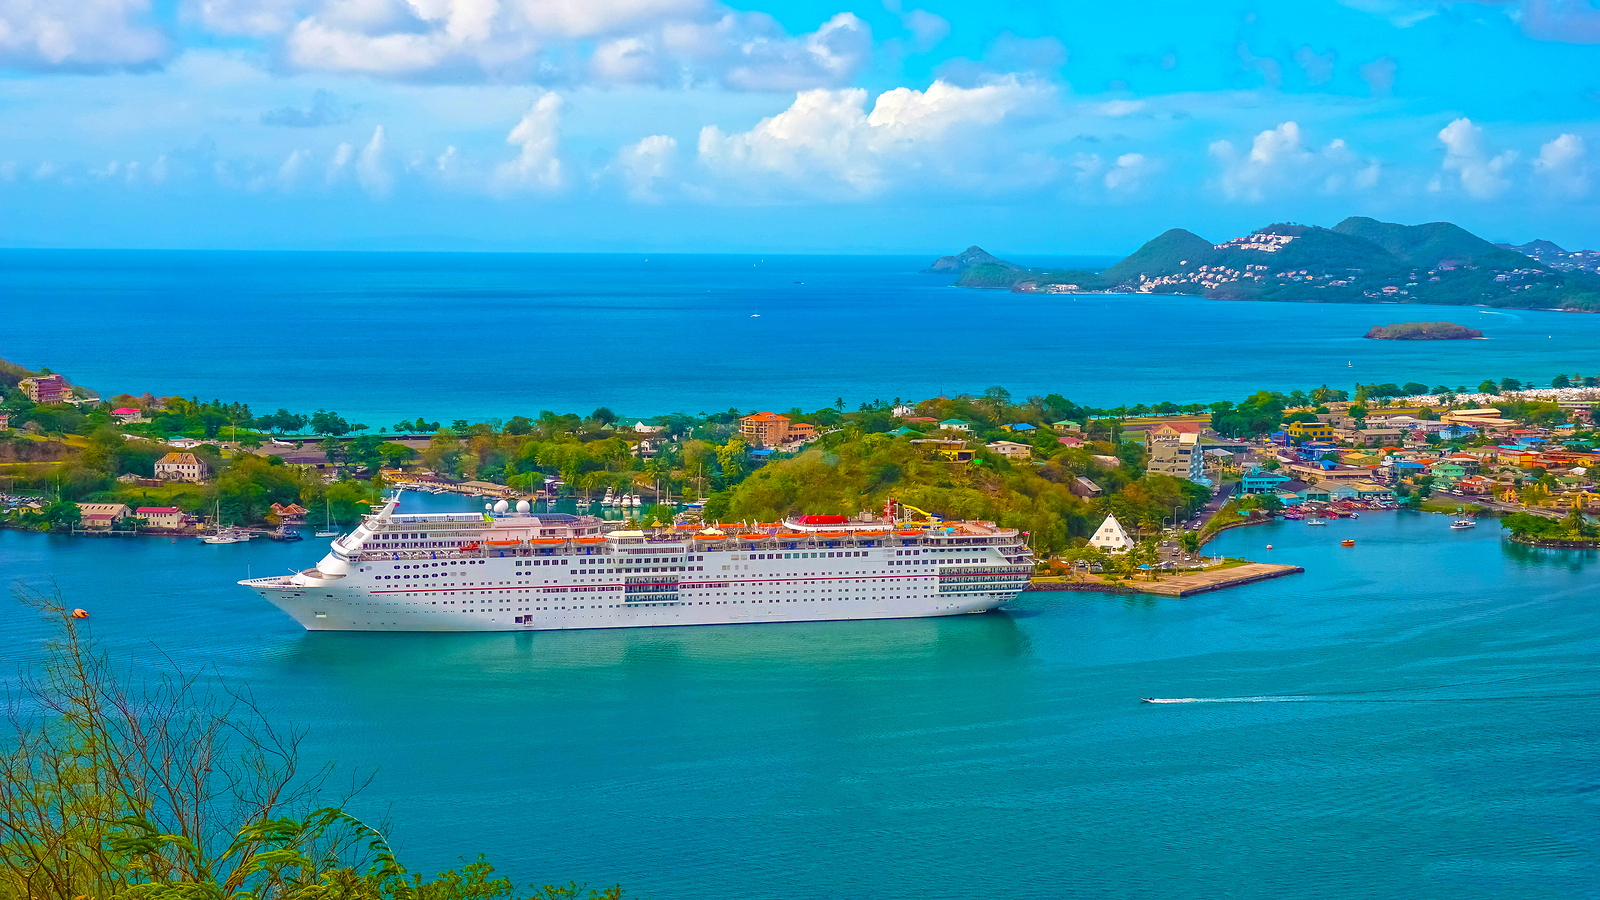 st lucia kryssning - The Port Or Cruise Dock At Saint Lucia Island At Caribbean Sea